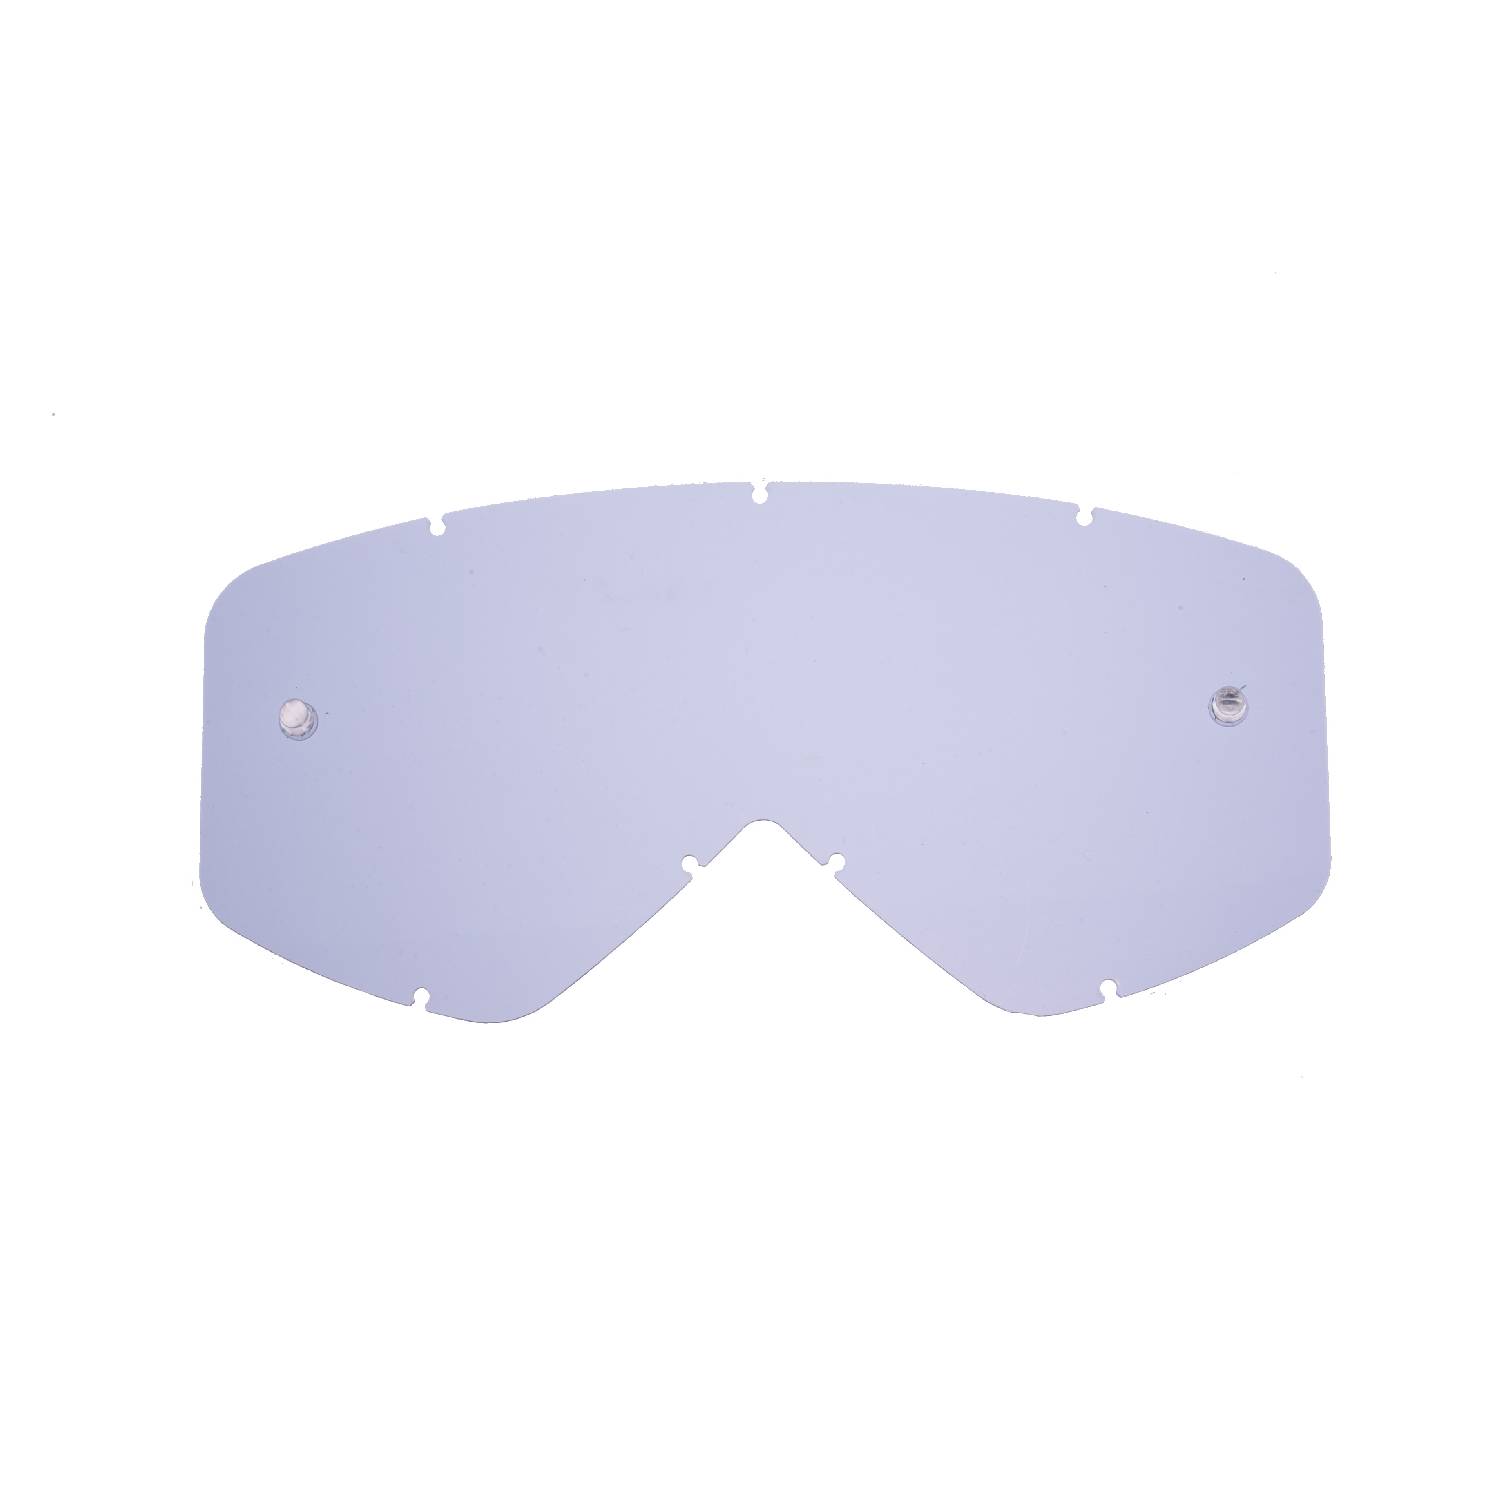 smokey replacement lenses for goggles compatible for Smith Fuel / Intake / V1 / V2 goggle